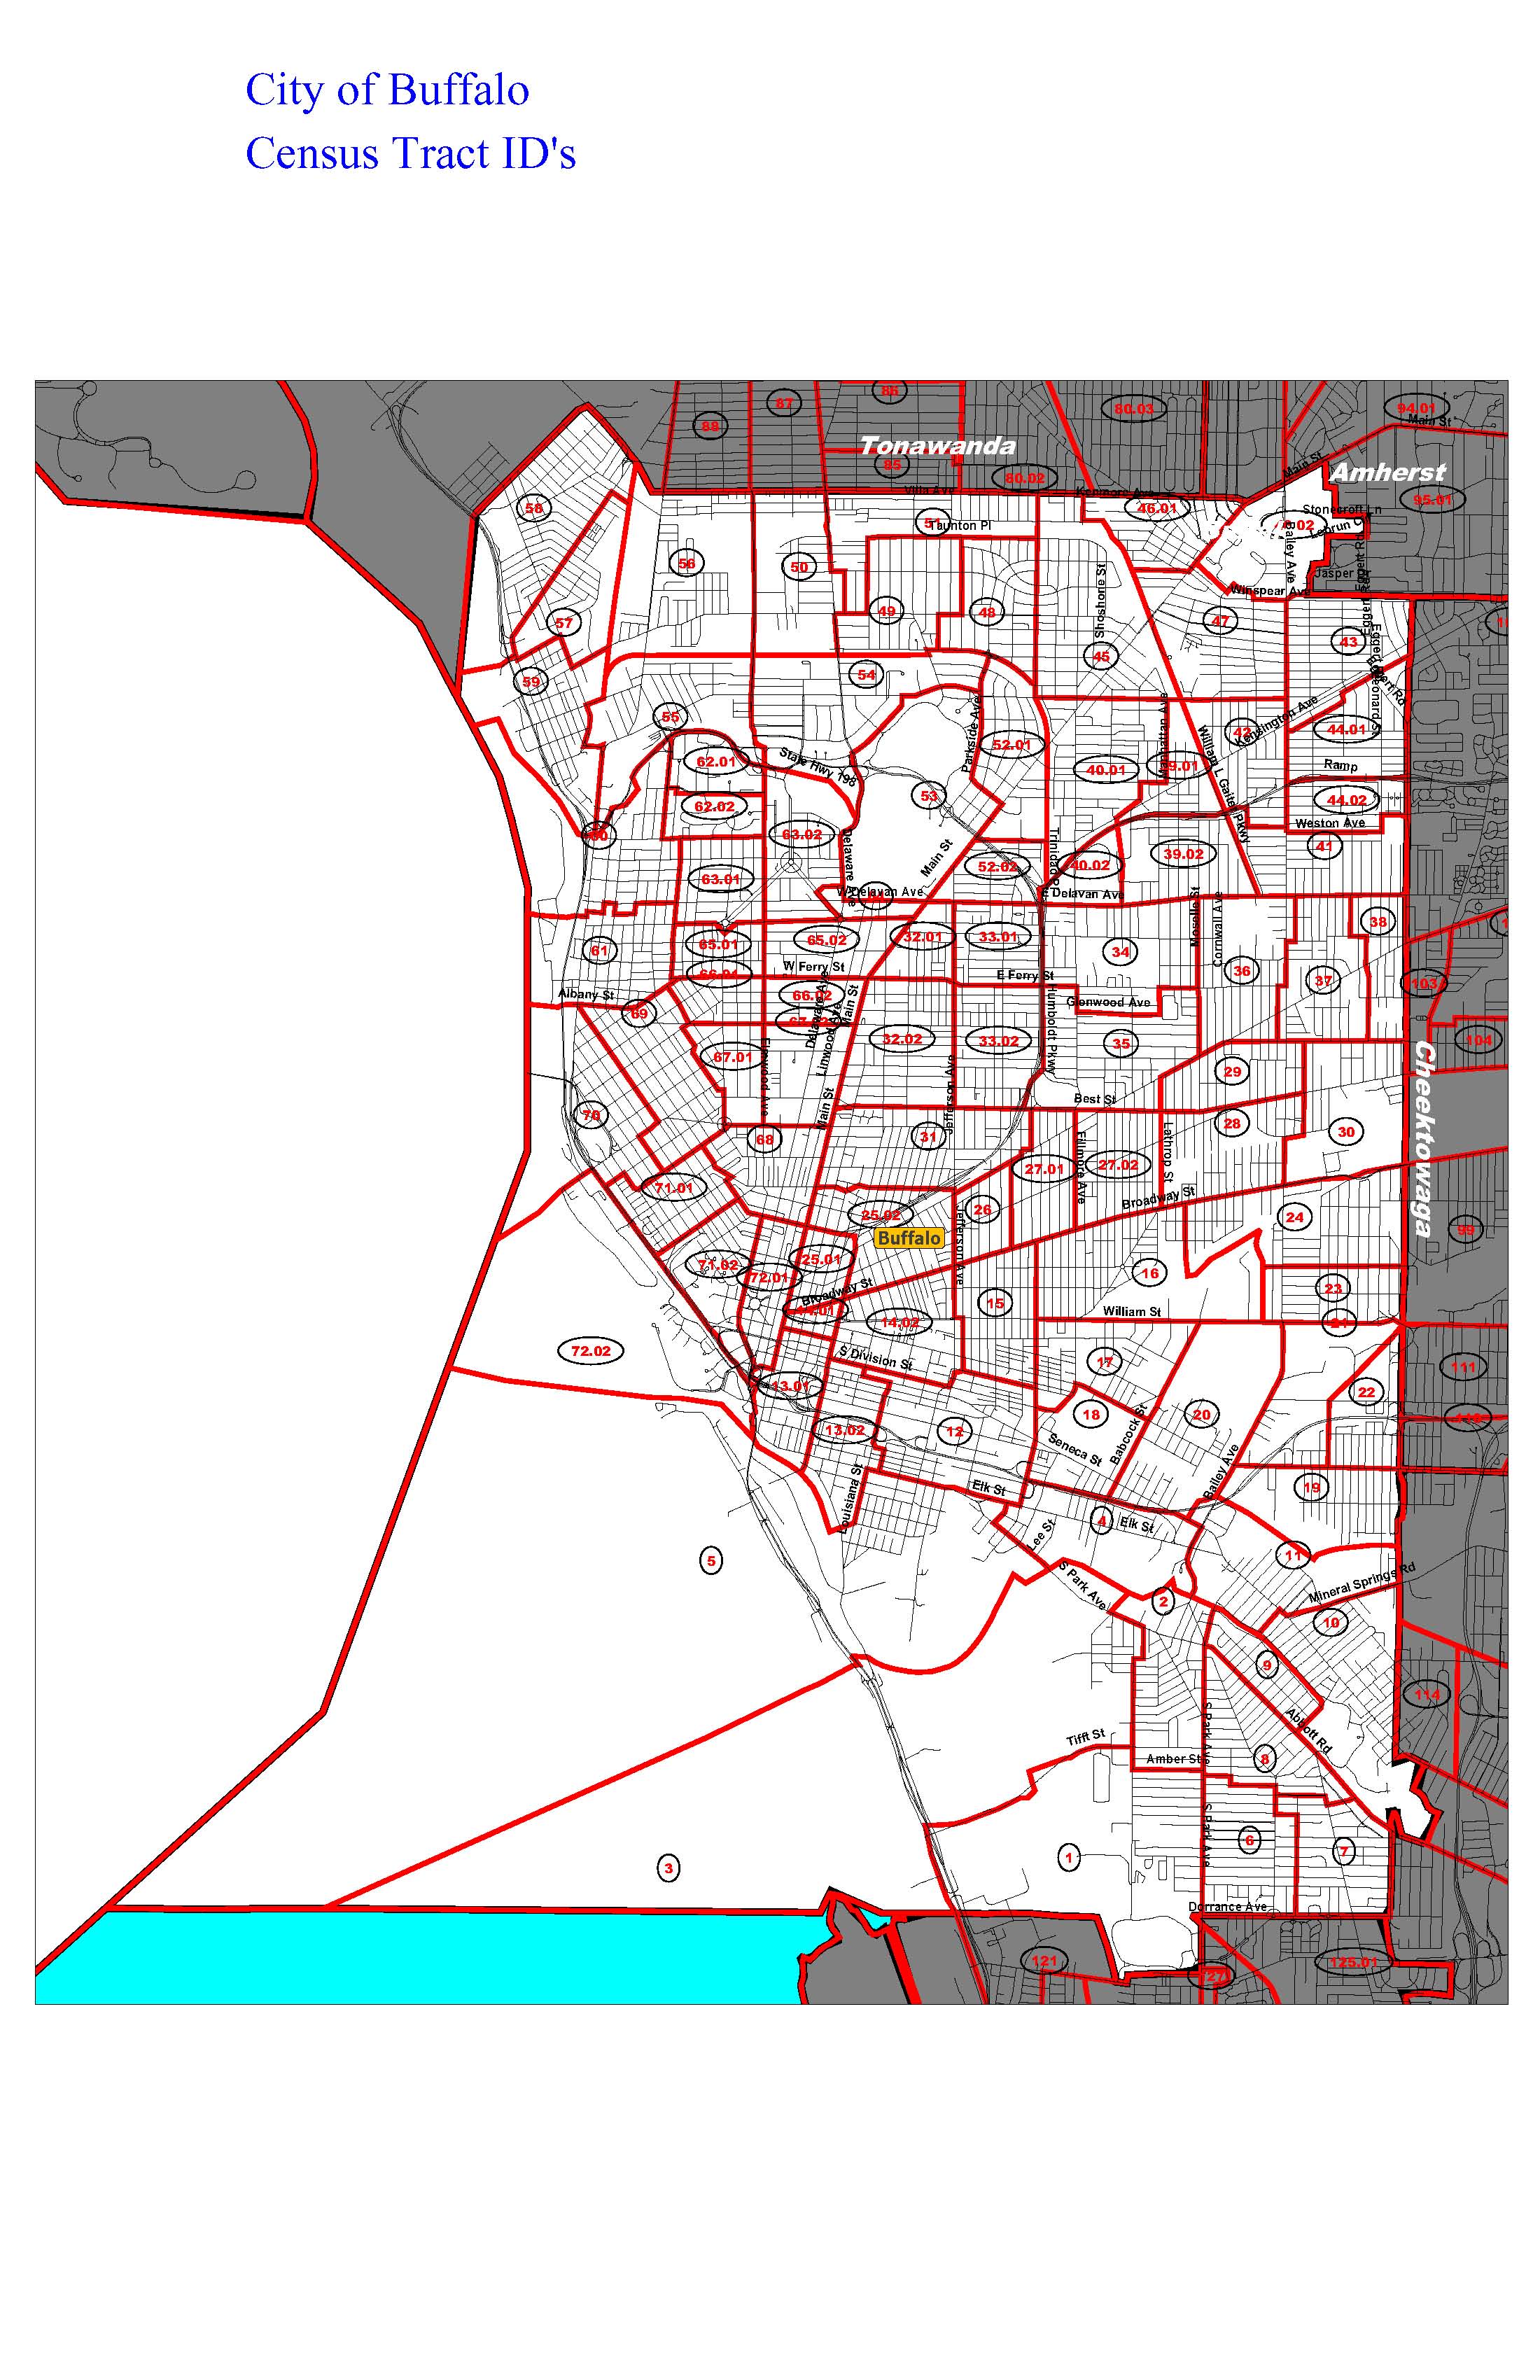 Map of City of Buffalo with Census Tracts